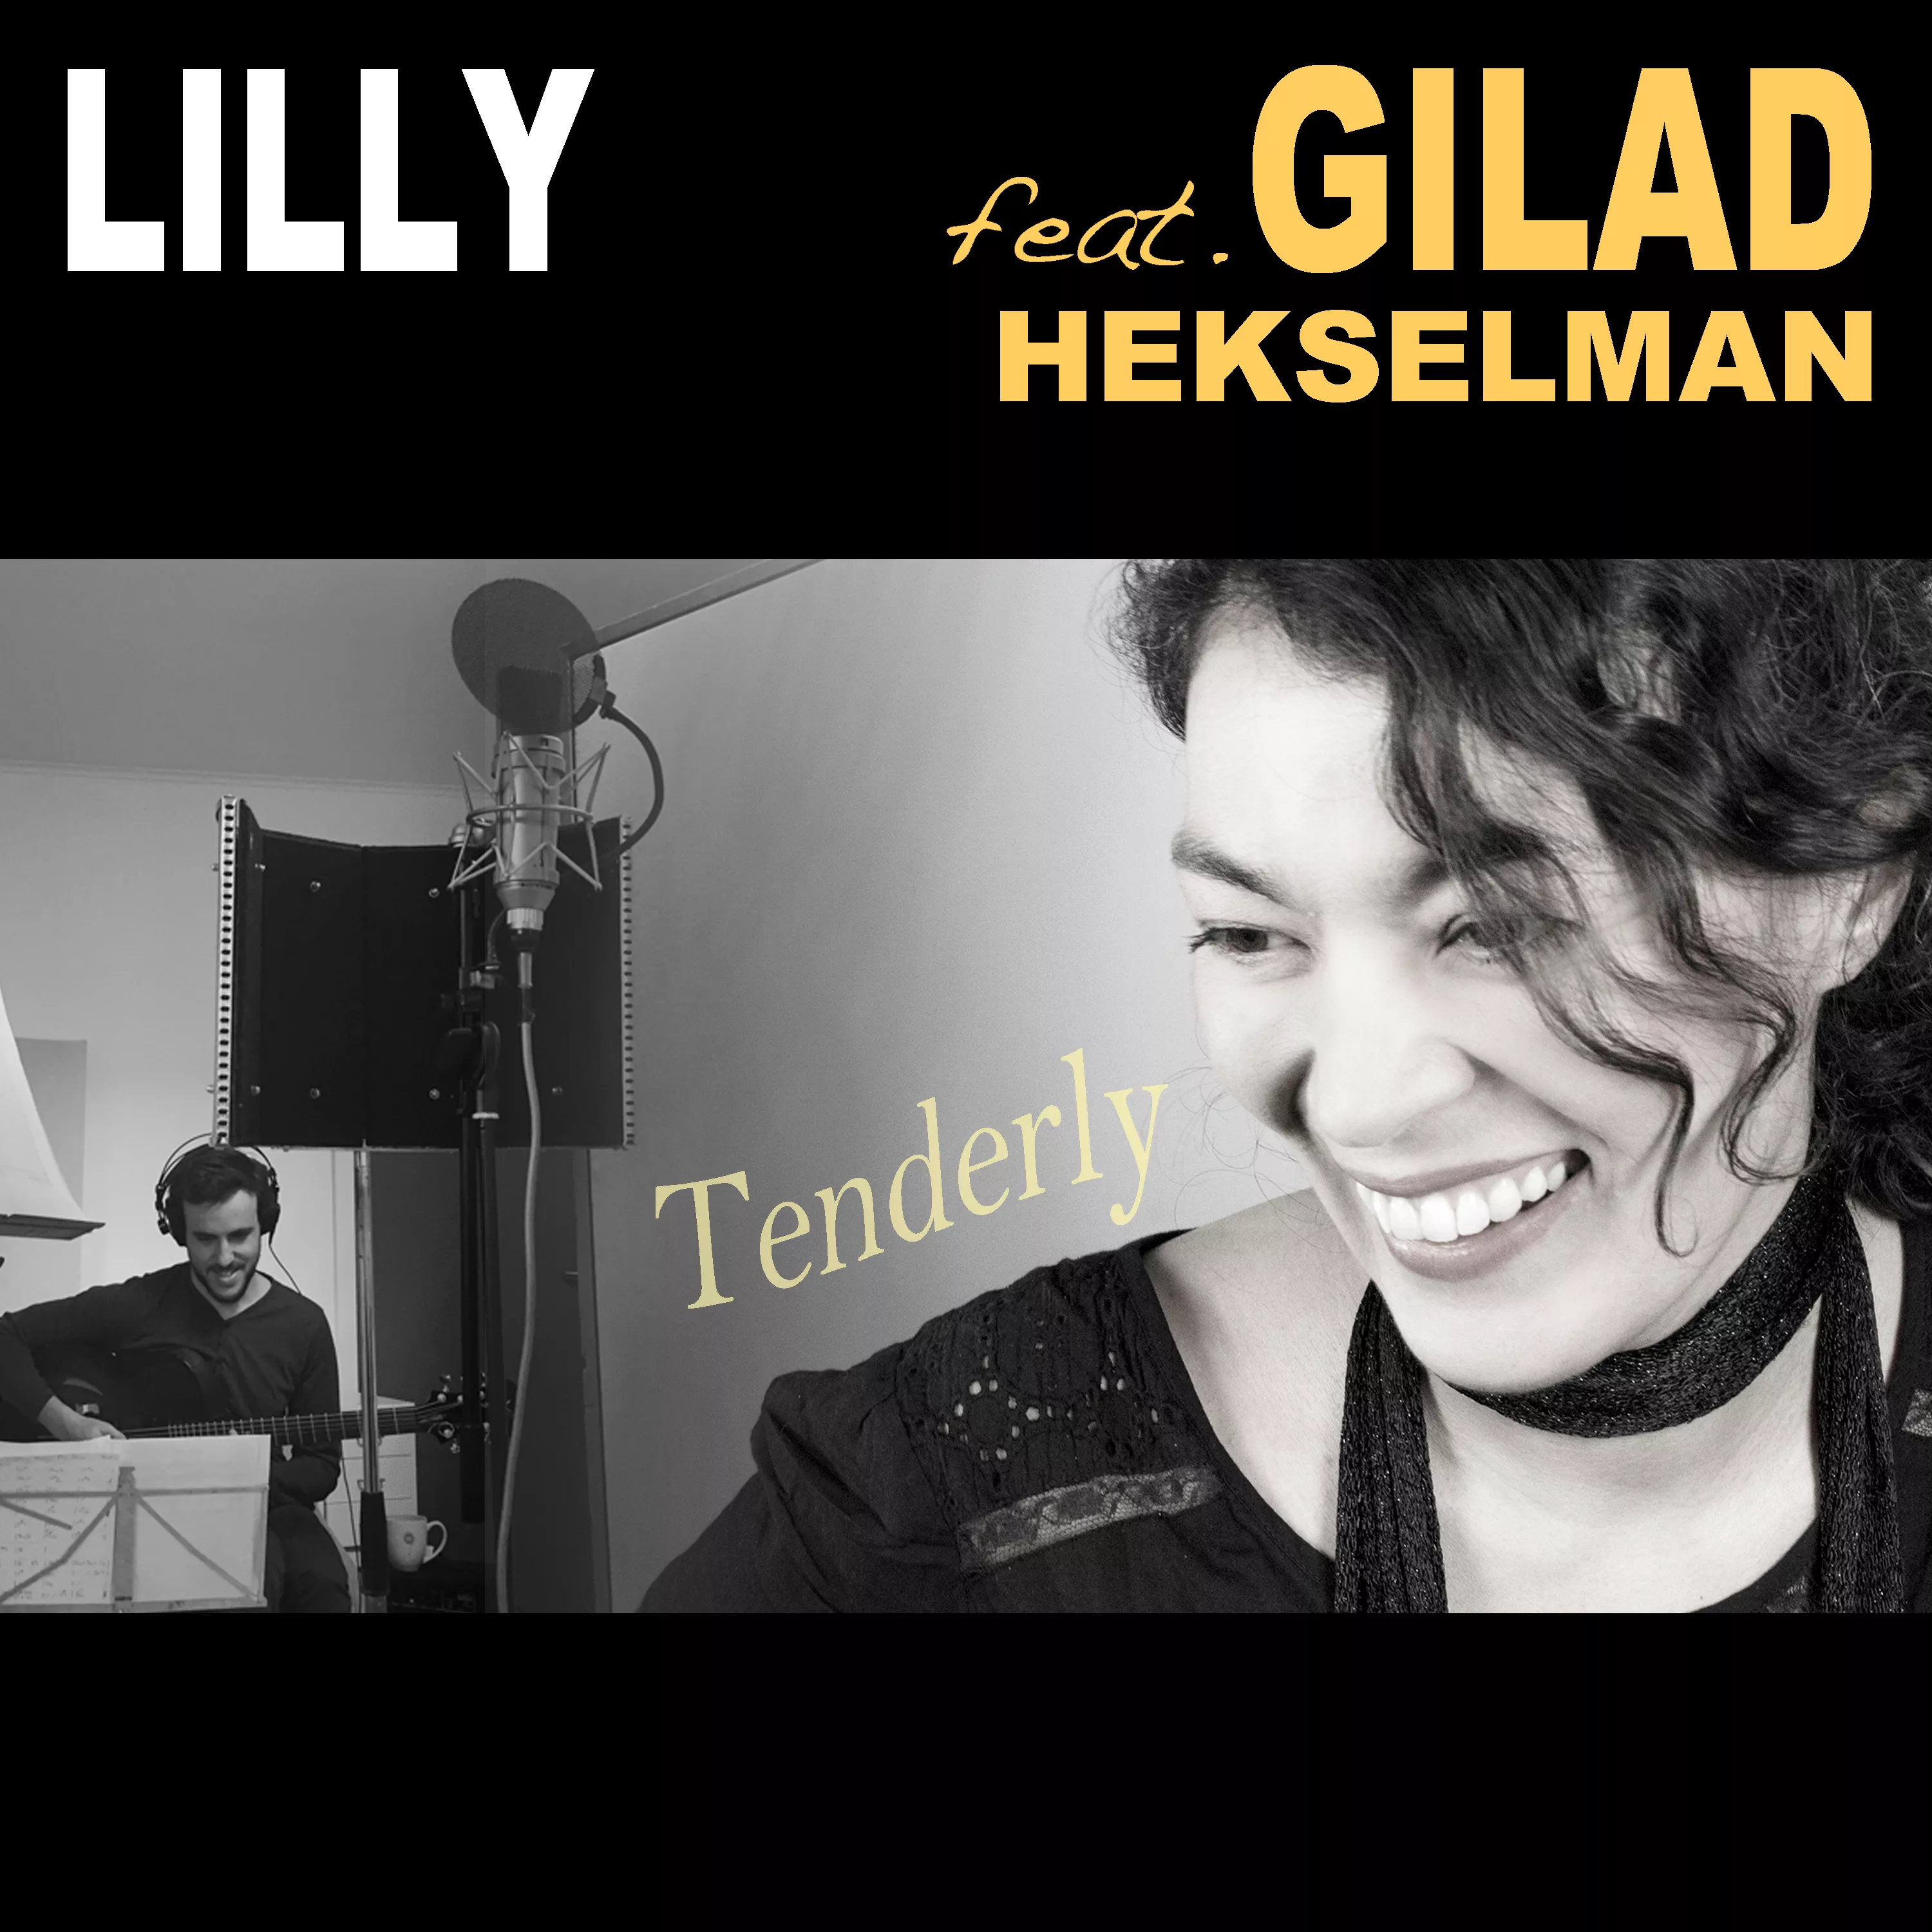 Tenderly - Lilly feat. Gilad Hekselman